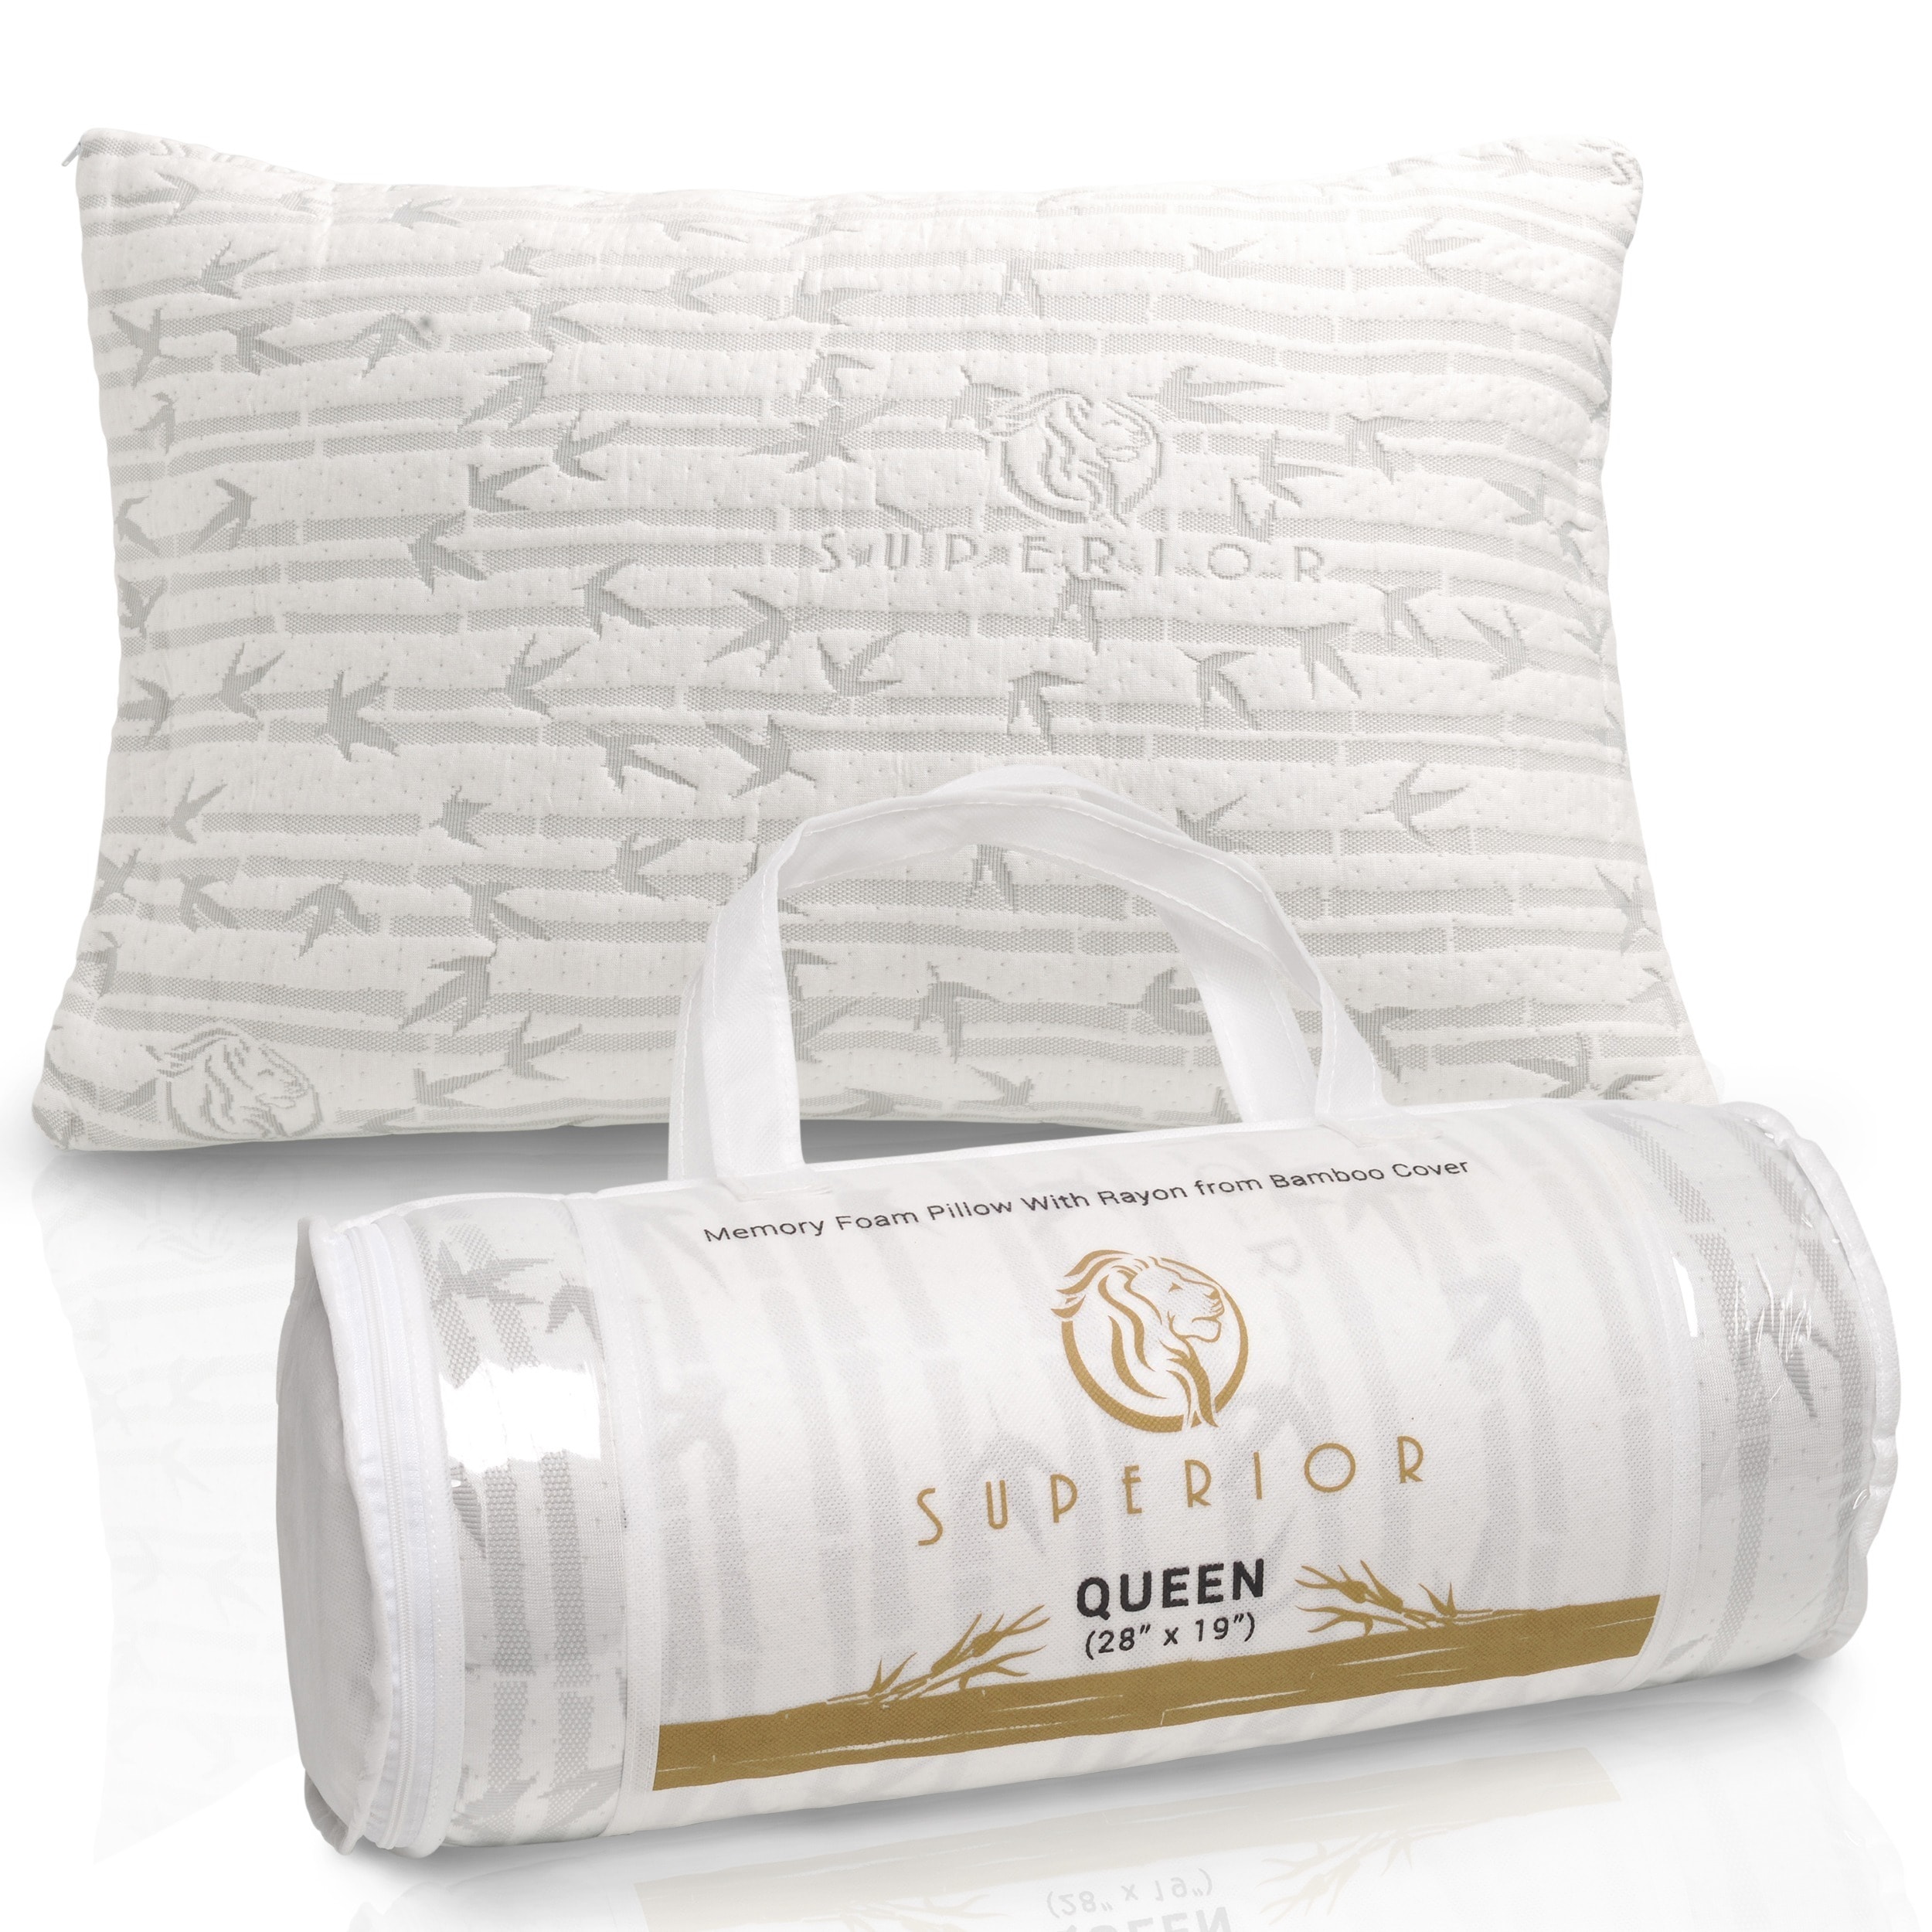 Superior Side Relief Pillow – The Balm Box